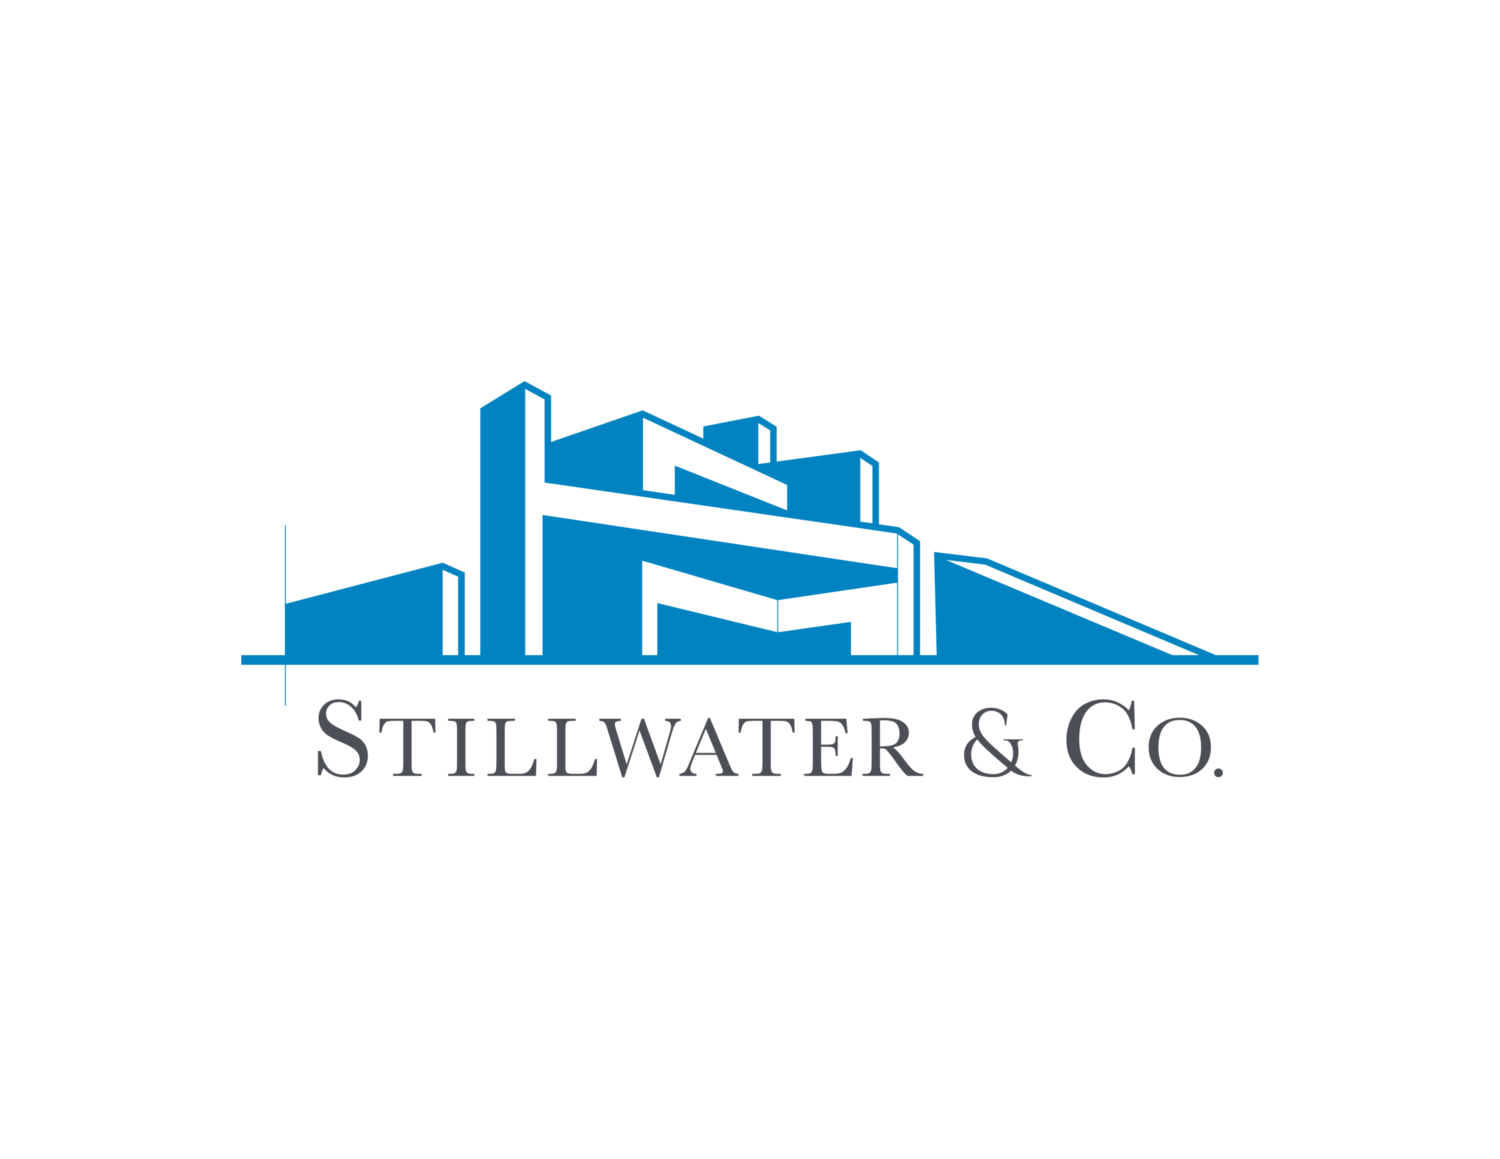 Stillwater and co.